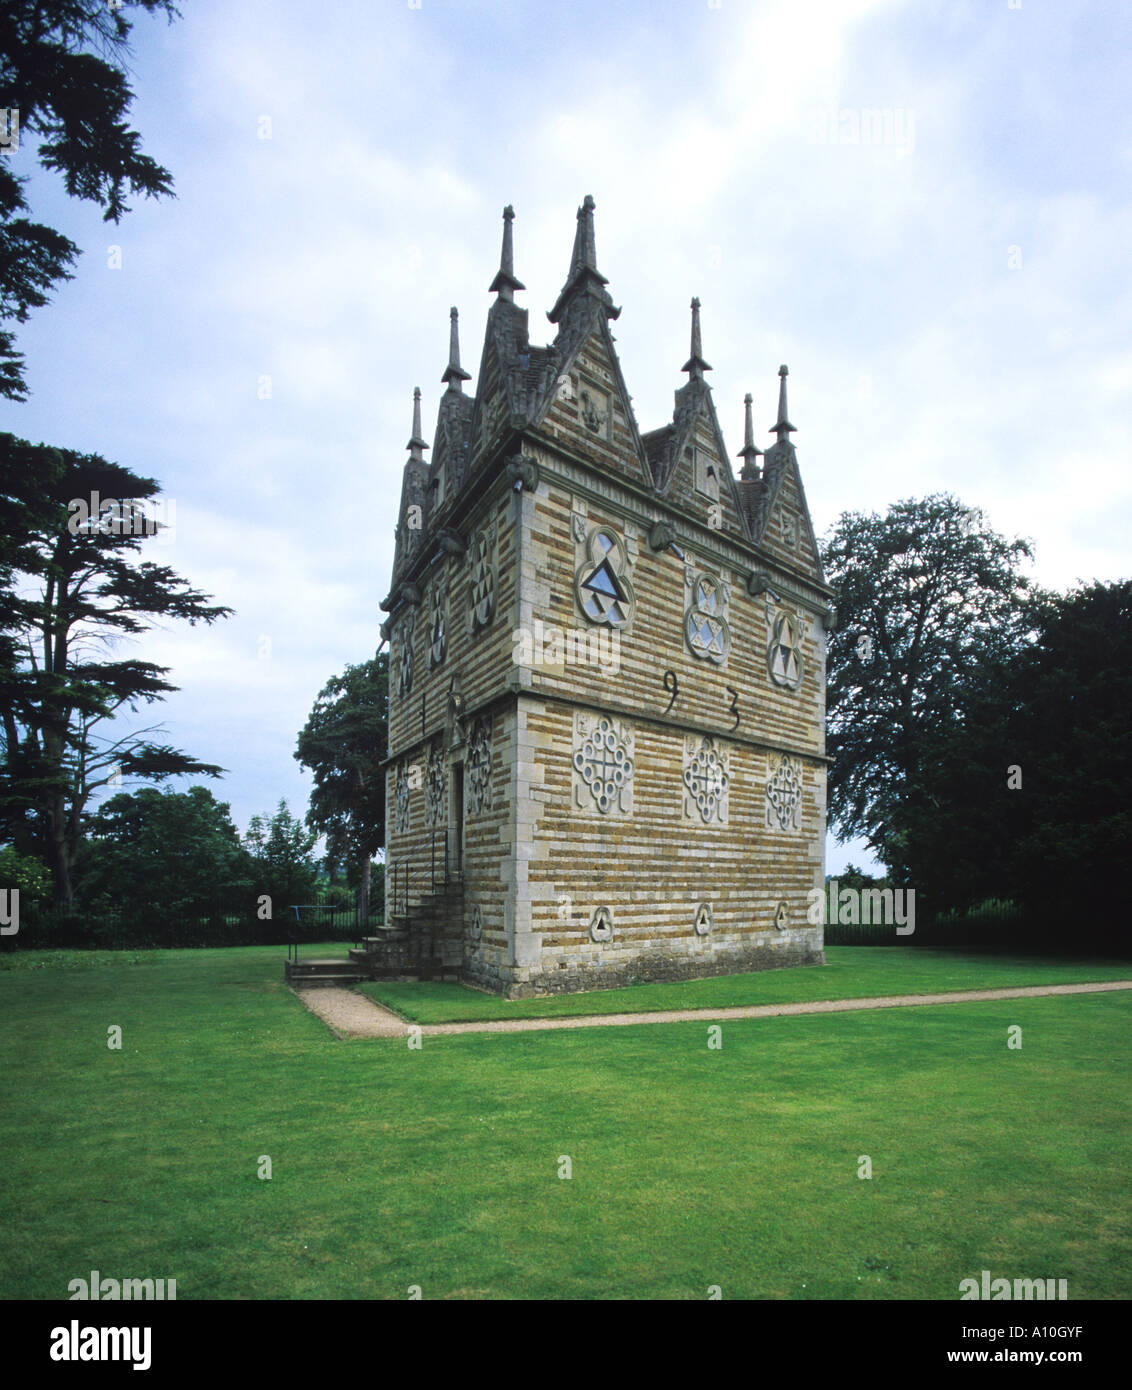 Triangular Lodge Folly built in 1592 by Sir Thomas Tresham at Rushton Everything built in threes and nines Stock Photo